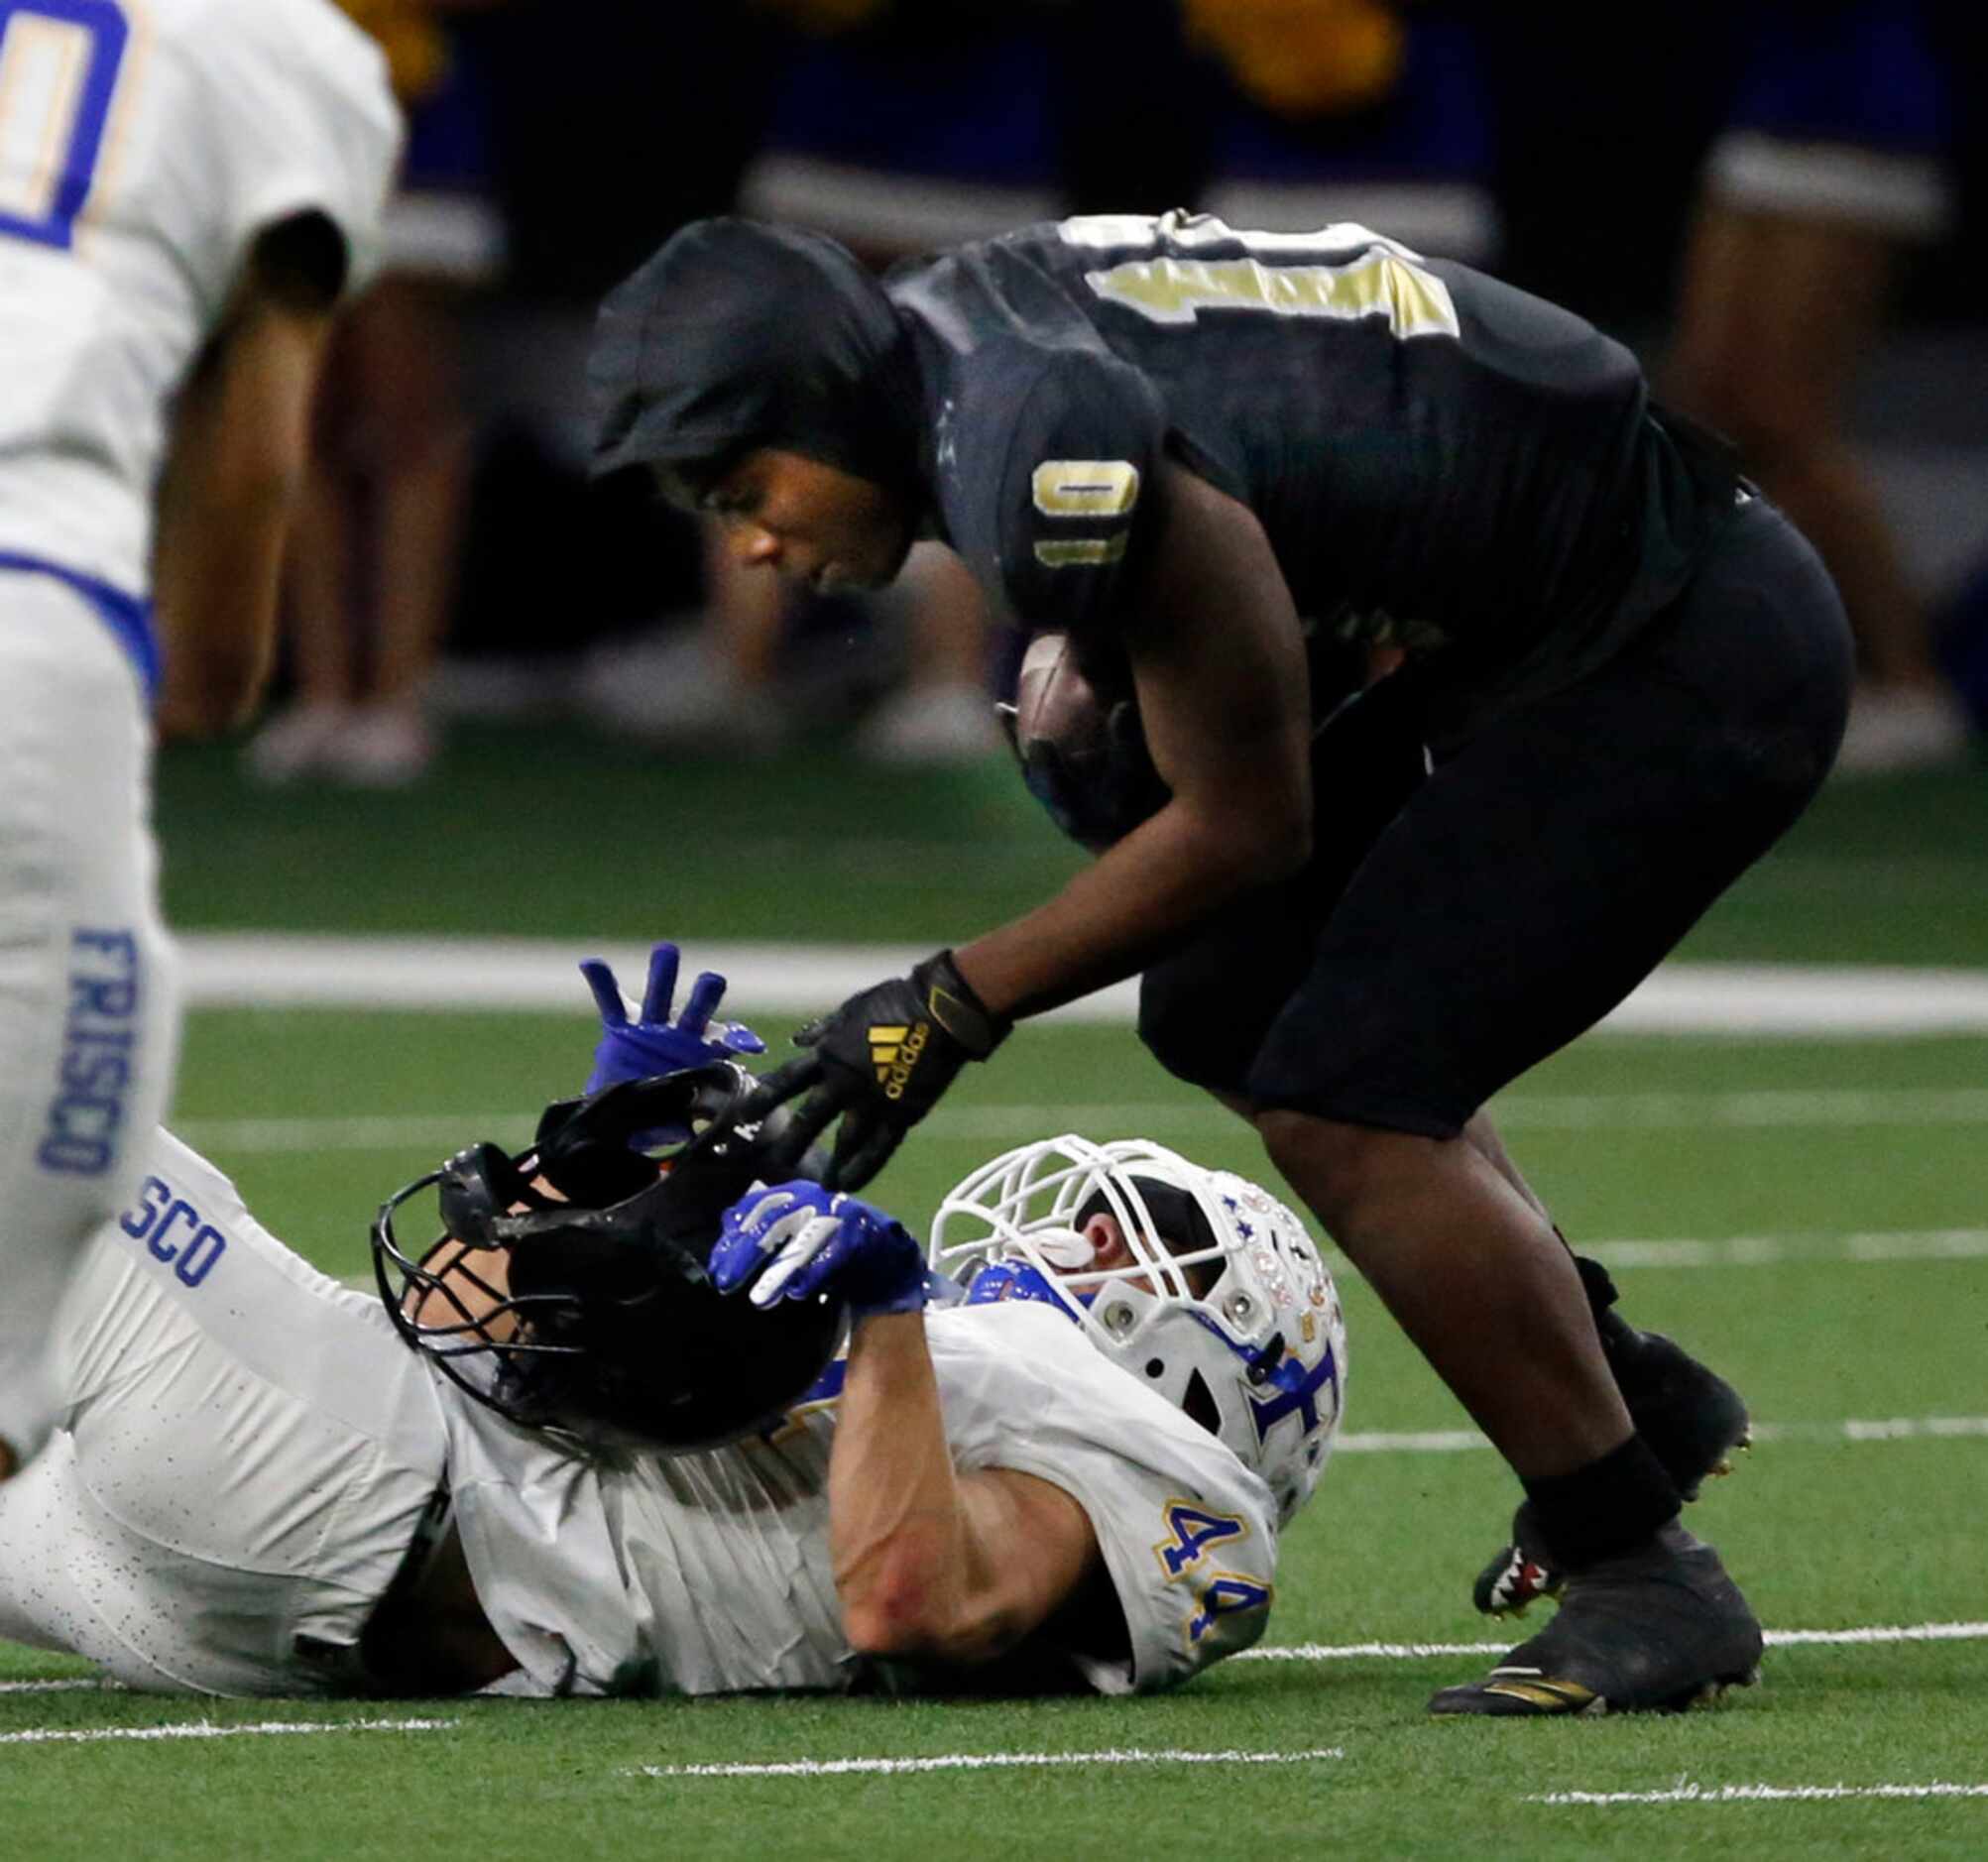 South Oak Cliff's Mikeviun Titus (10) keeps the football, but looses his helmet, to Frisco...